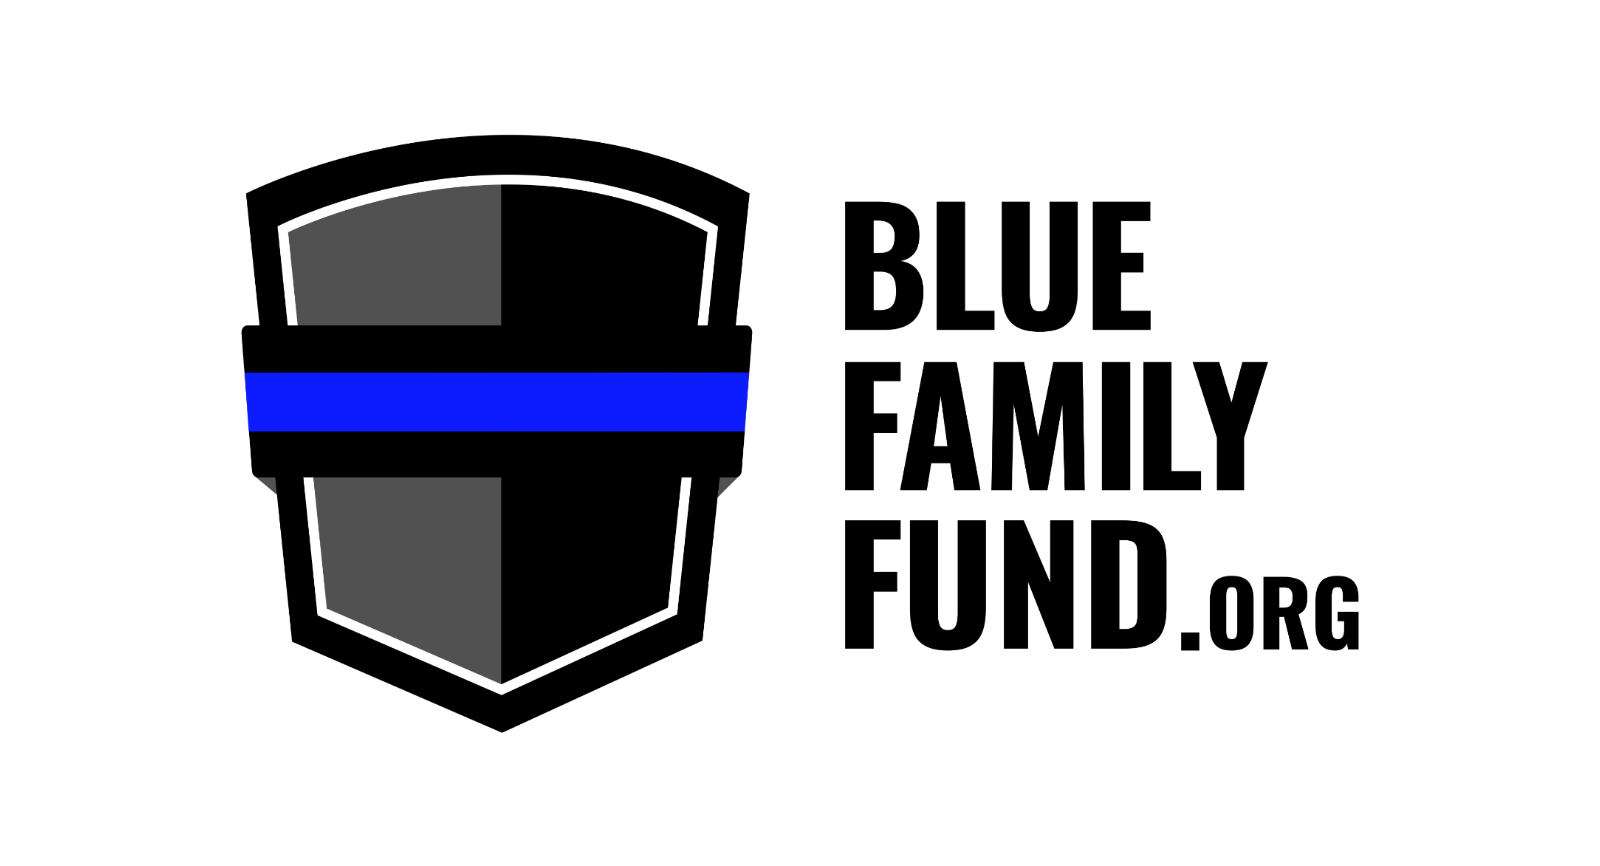 Blue Family Fund Organized 1st Annual Hacker’s Ball Golf Tournament, Raised $16k For First Responder Families